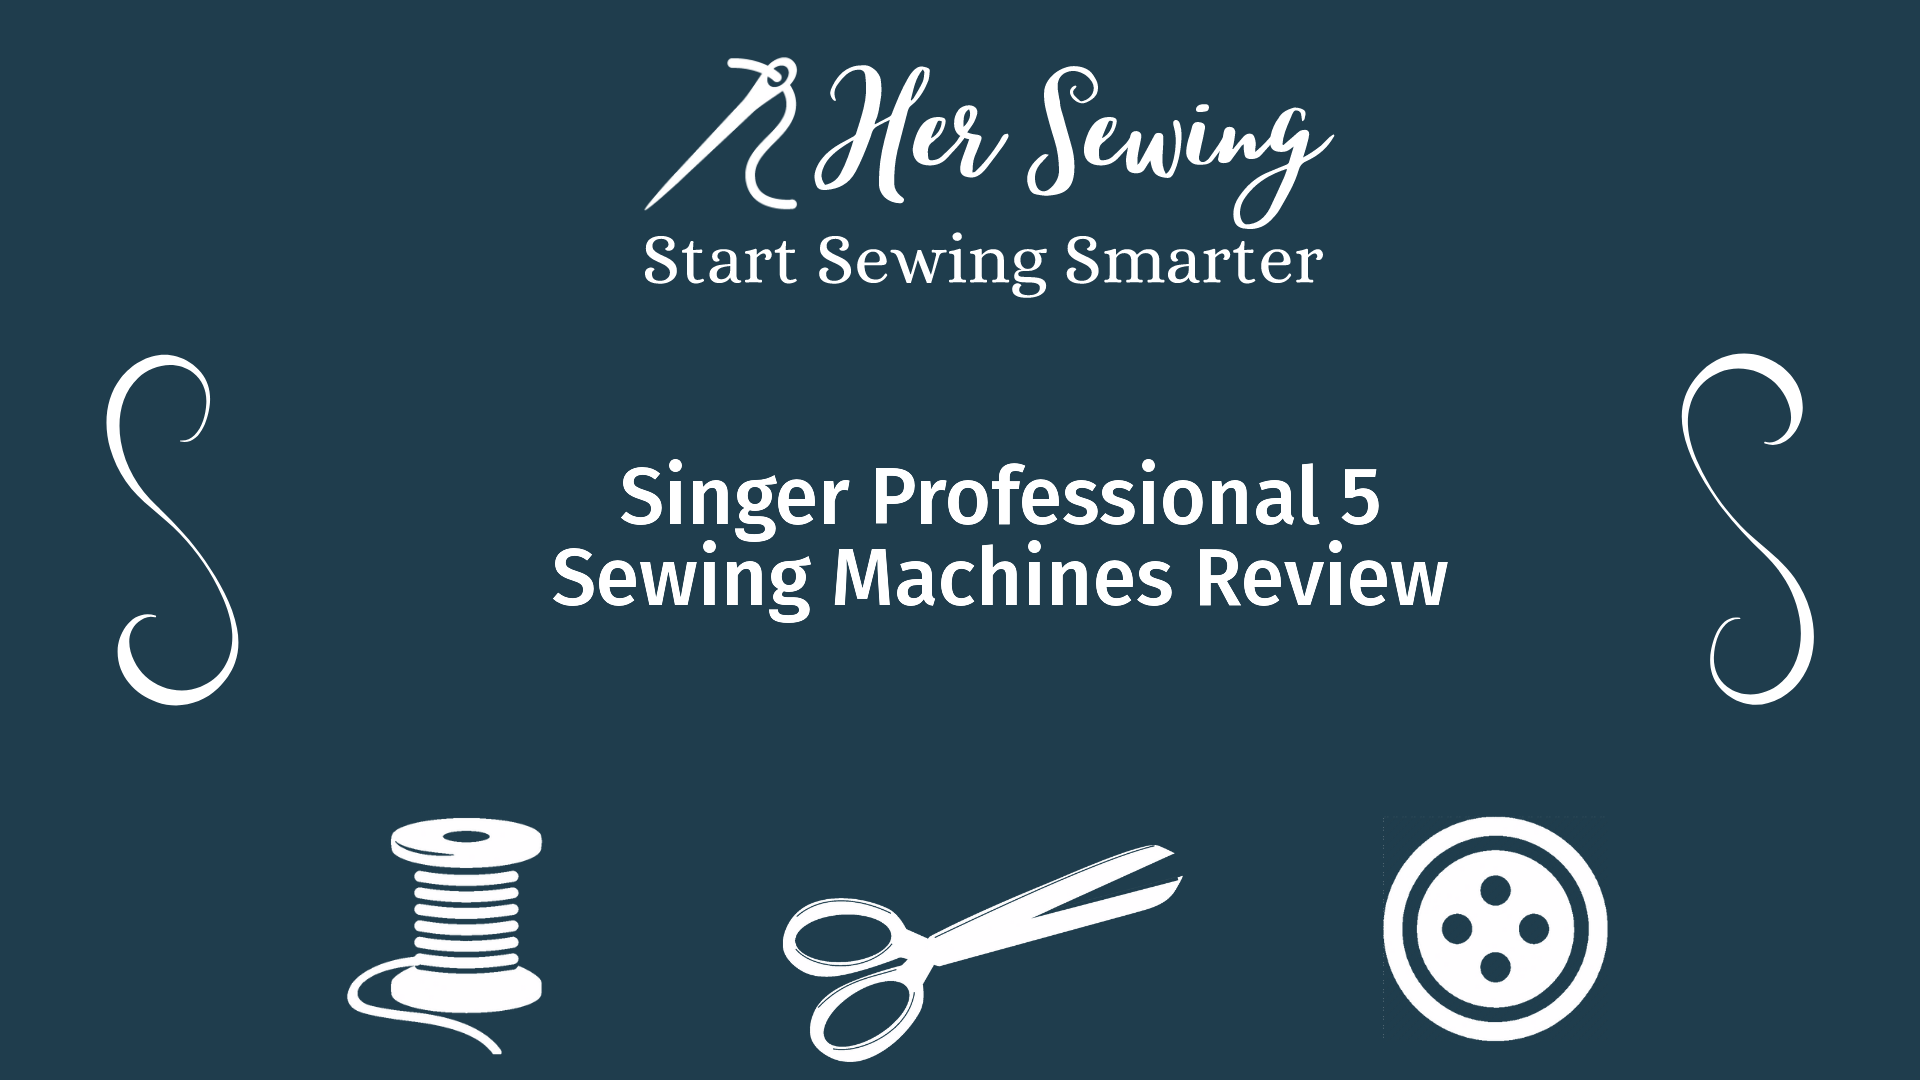 Singer Professional 5 Sewing Machines Review